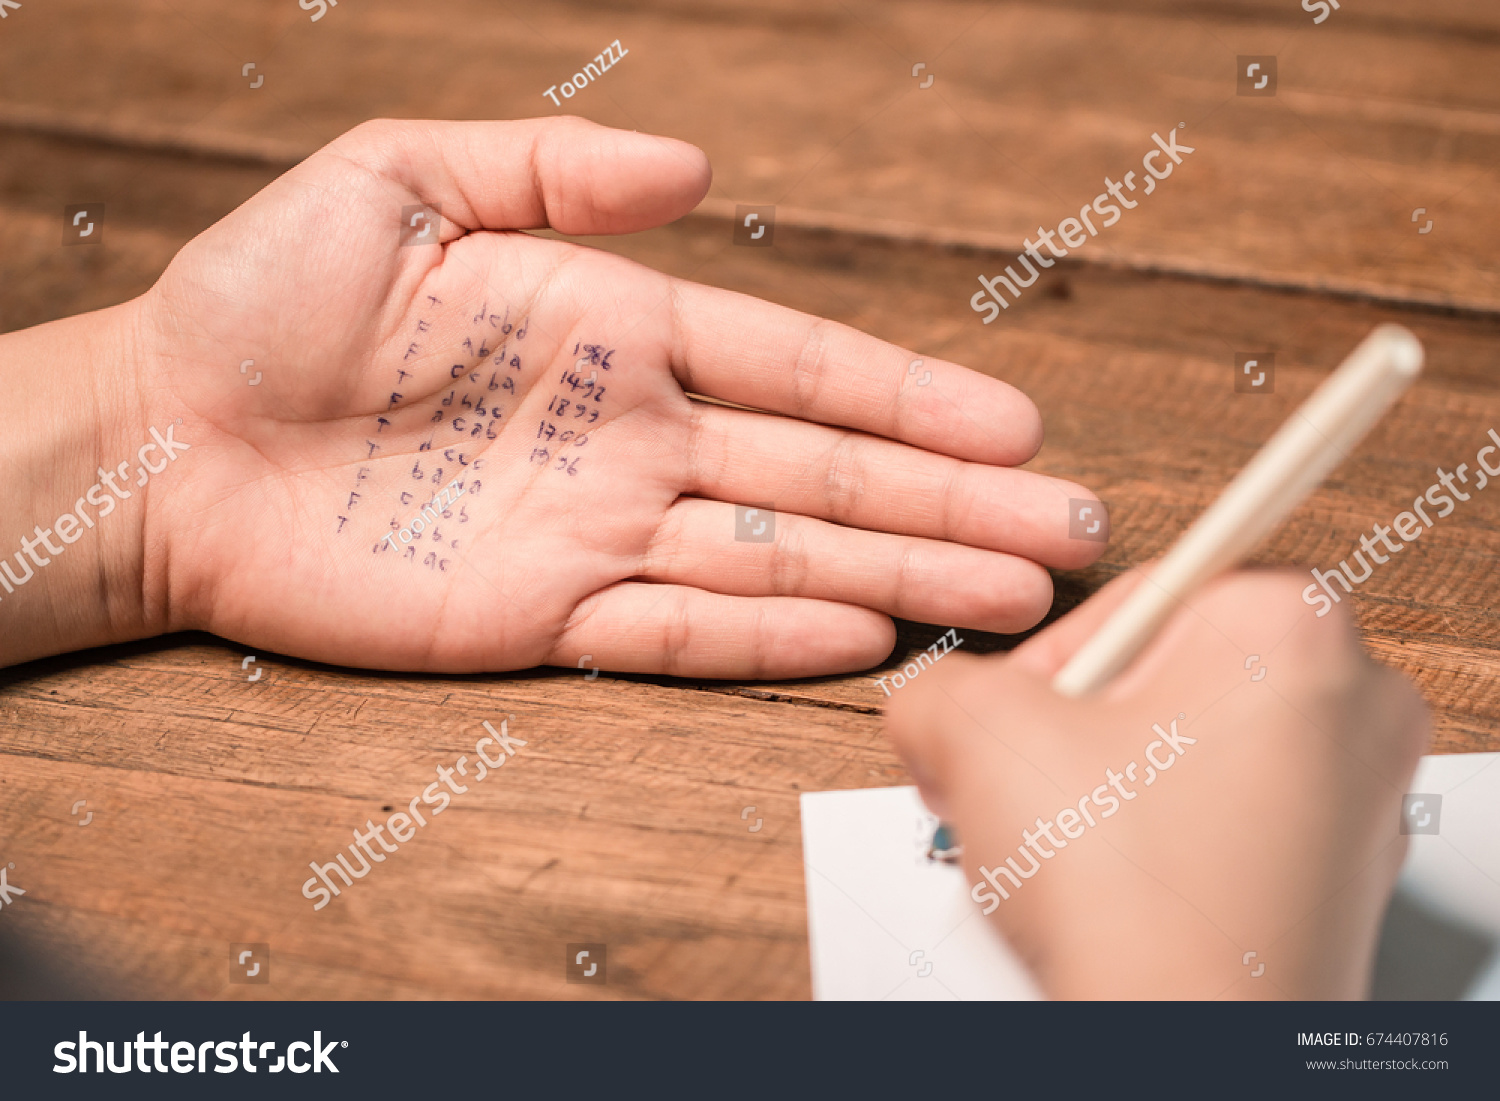 People cheating on test by writing answer on hand #674407816